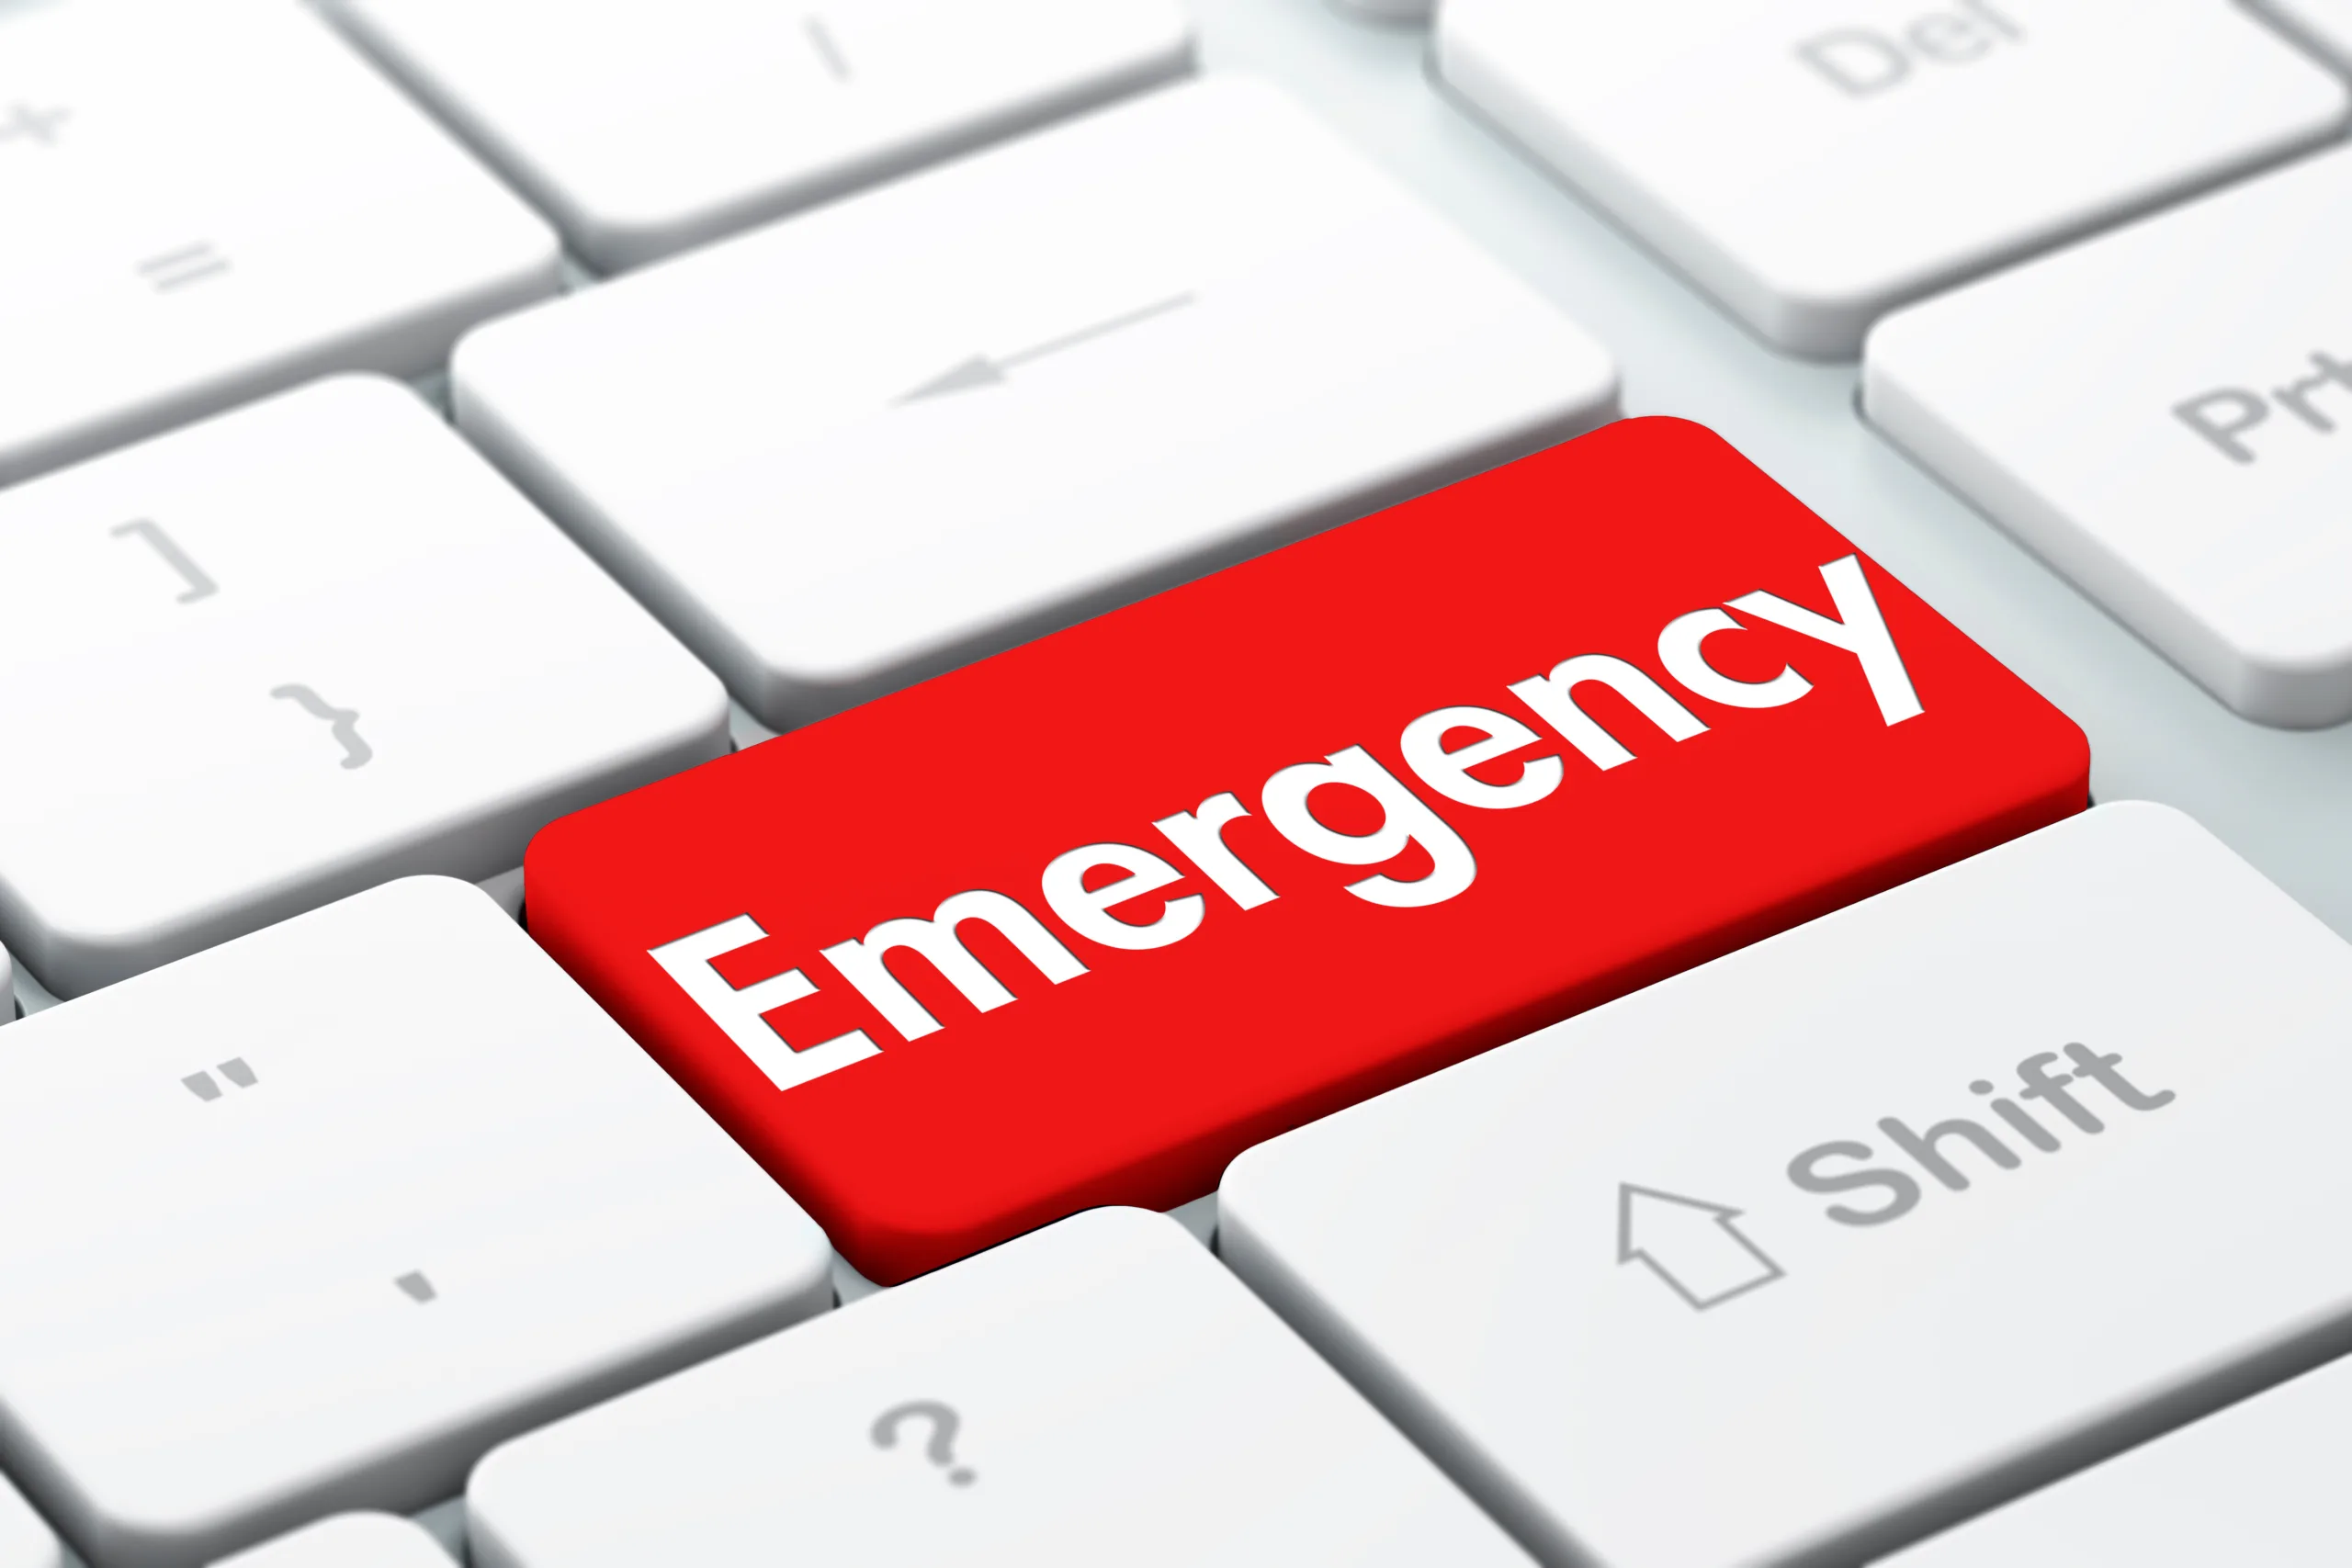 Emergency IT Support